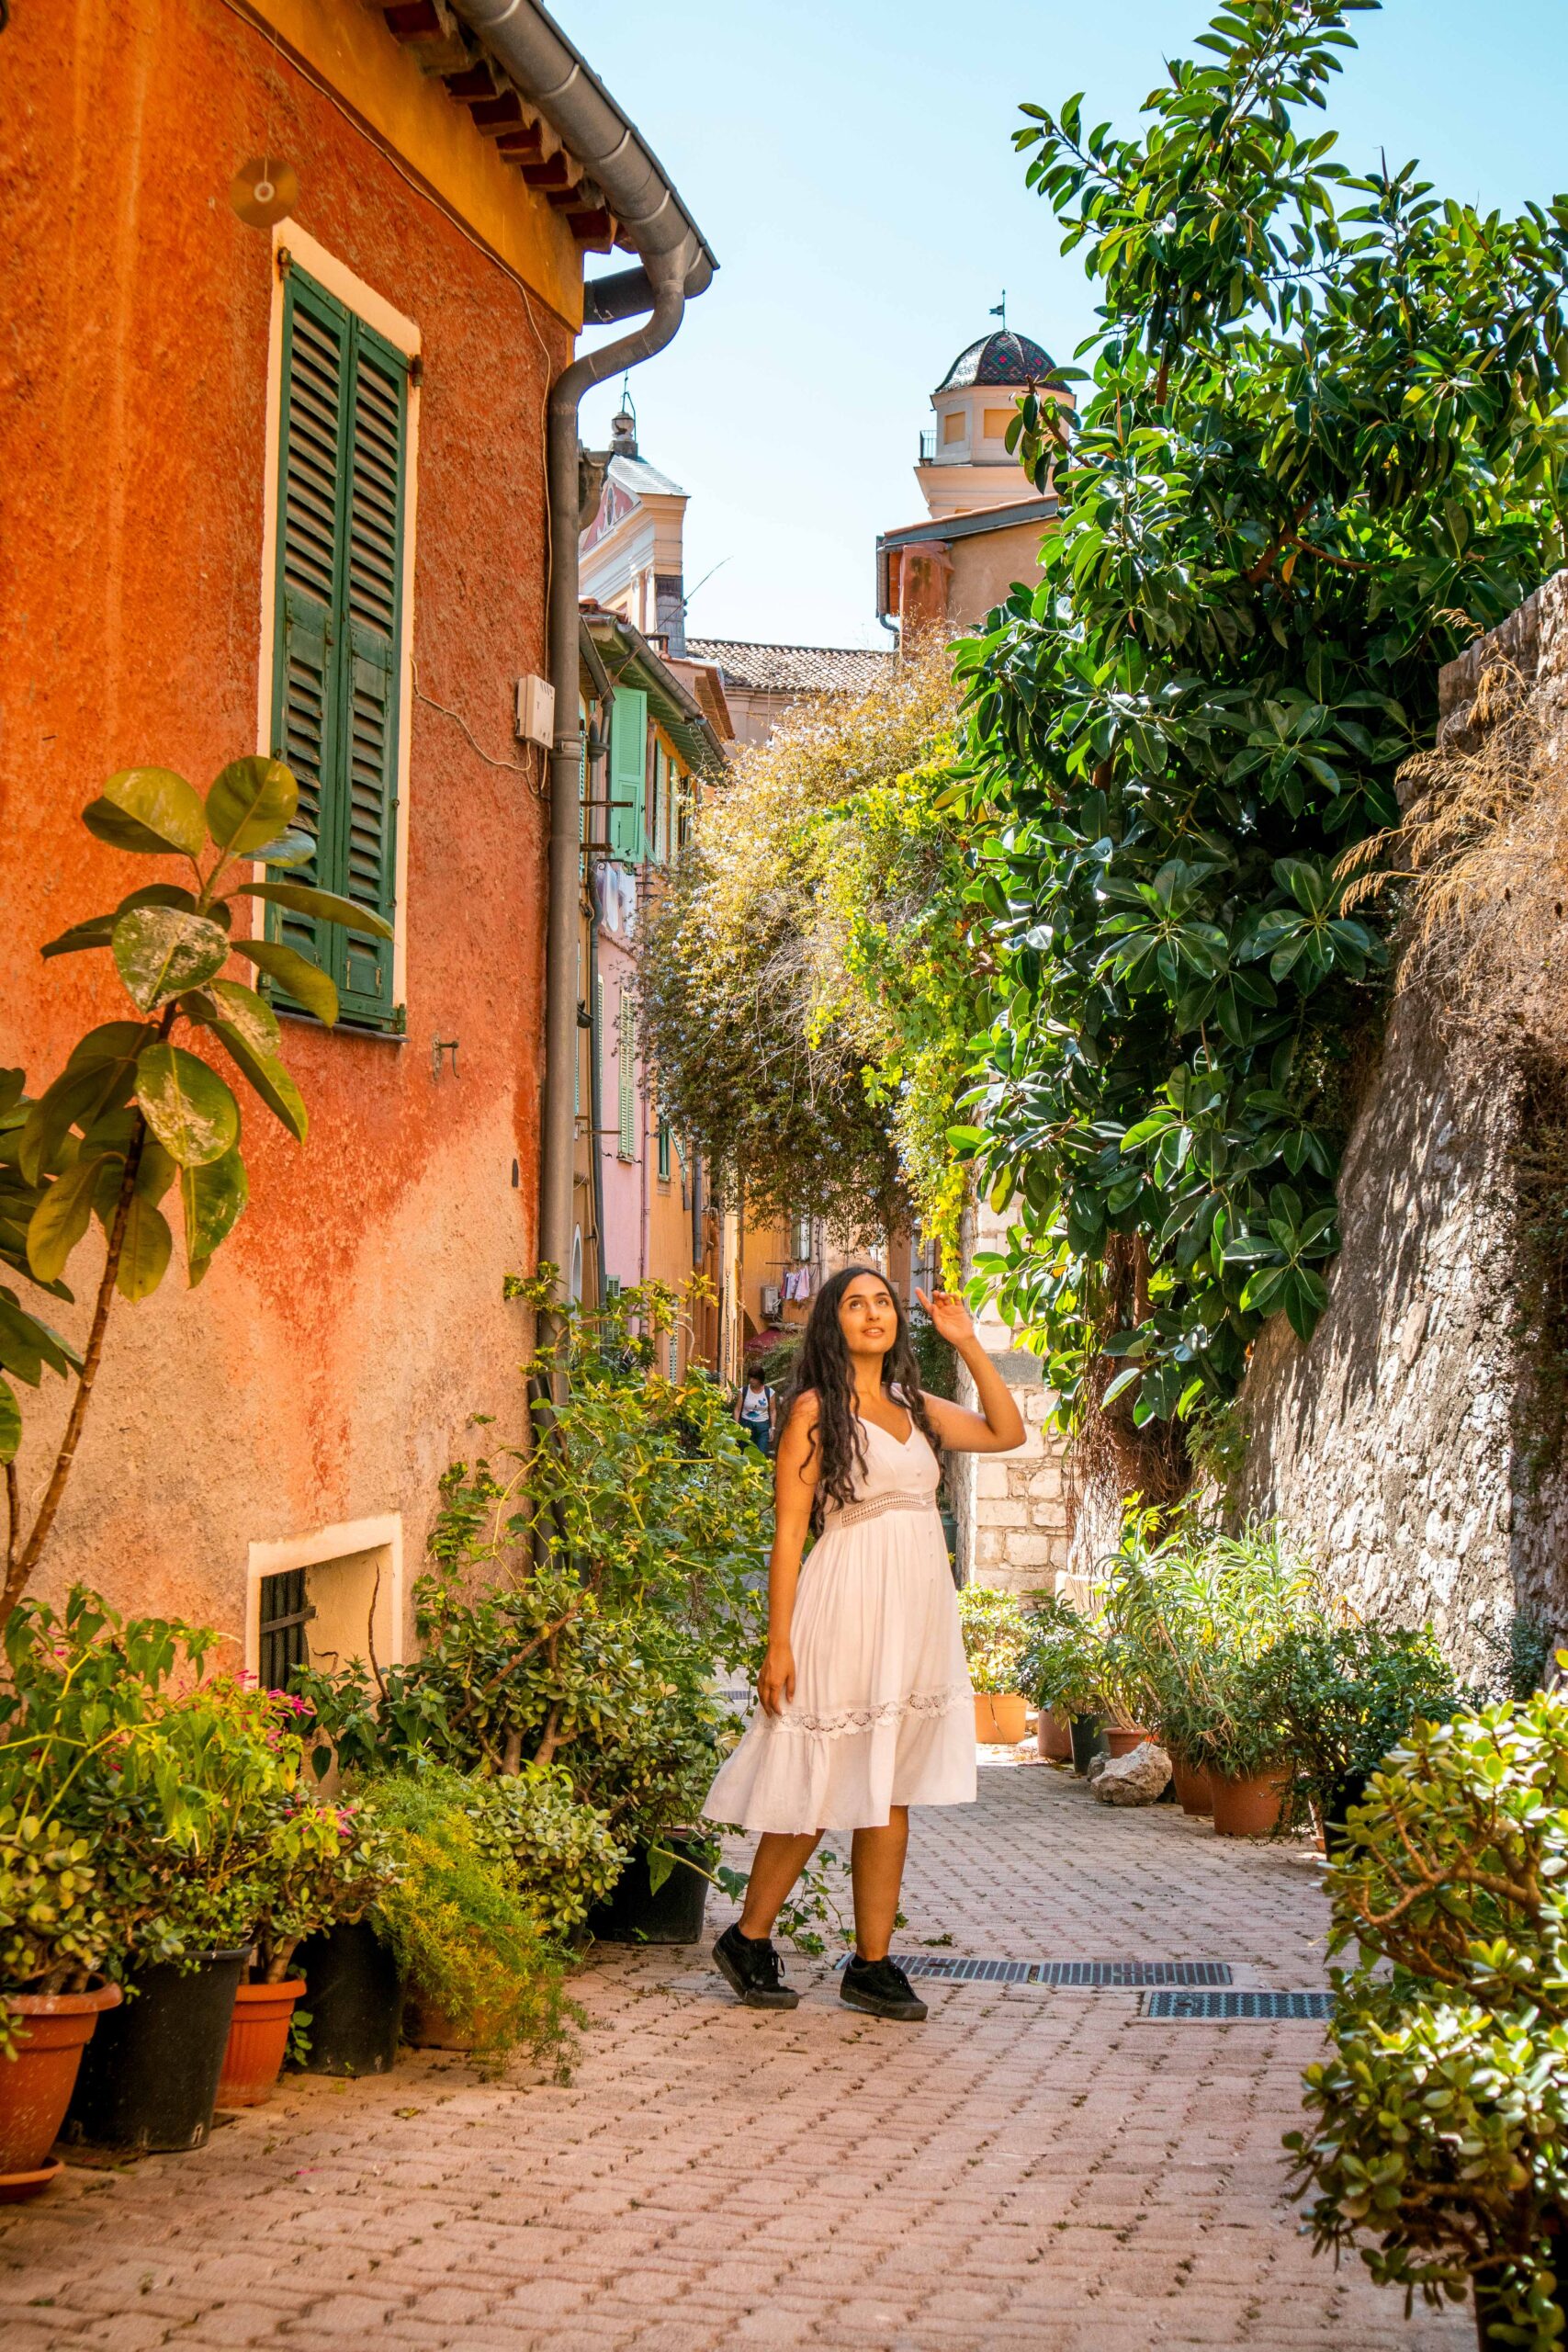 Woman wearing a white dress posing in a narrow and colourful street in the Old Town of Villefranche-sur-Mer, France